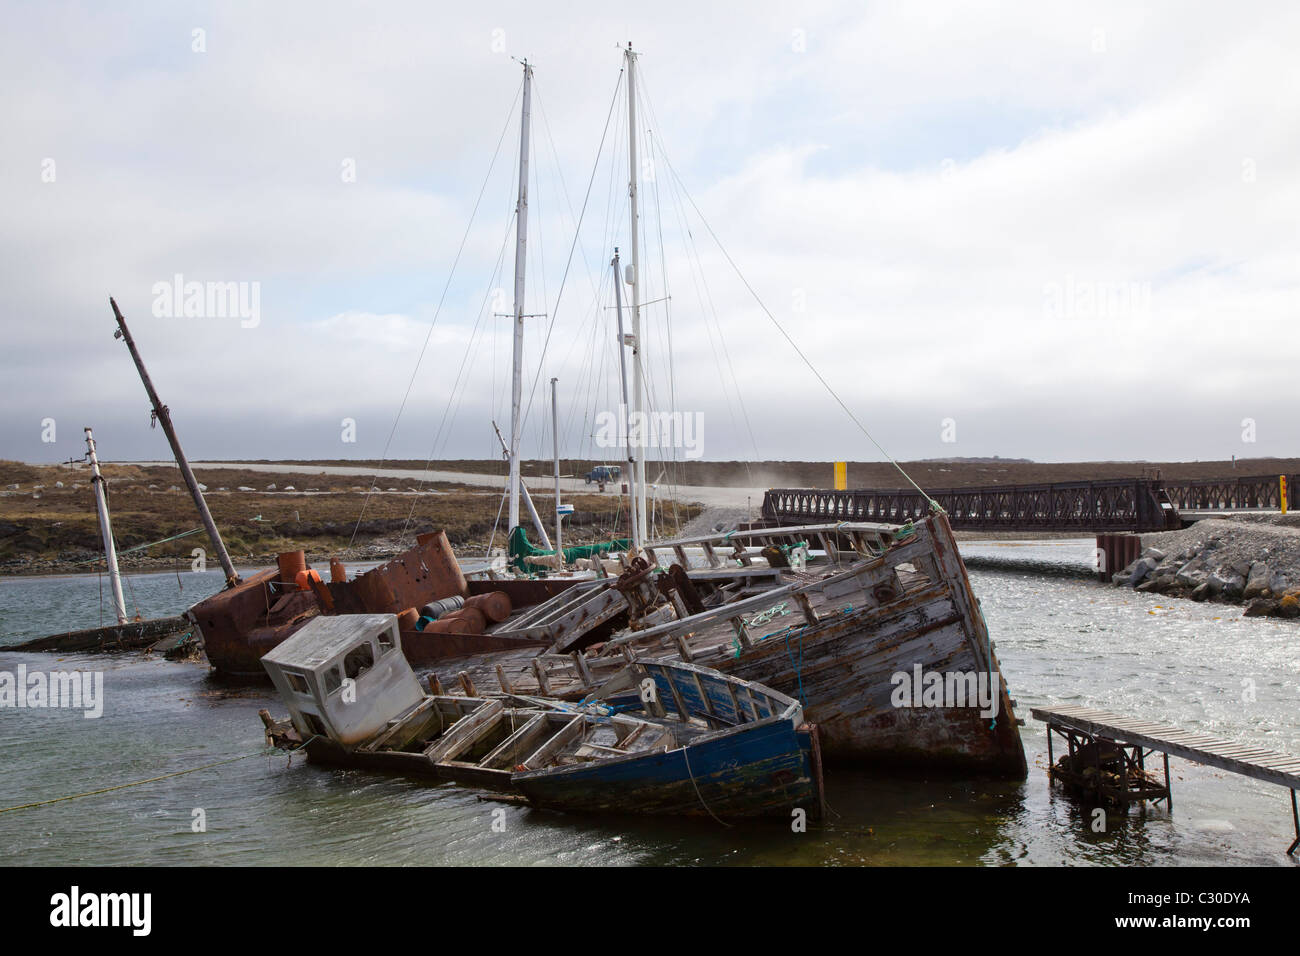 Two listing wooden shipwrecks at Port Stanley, East Falklands Stock Photo